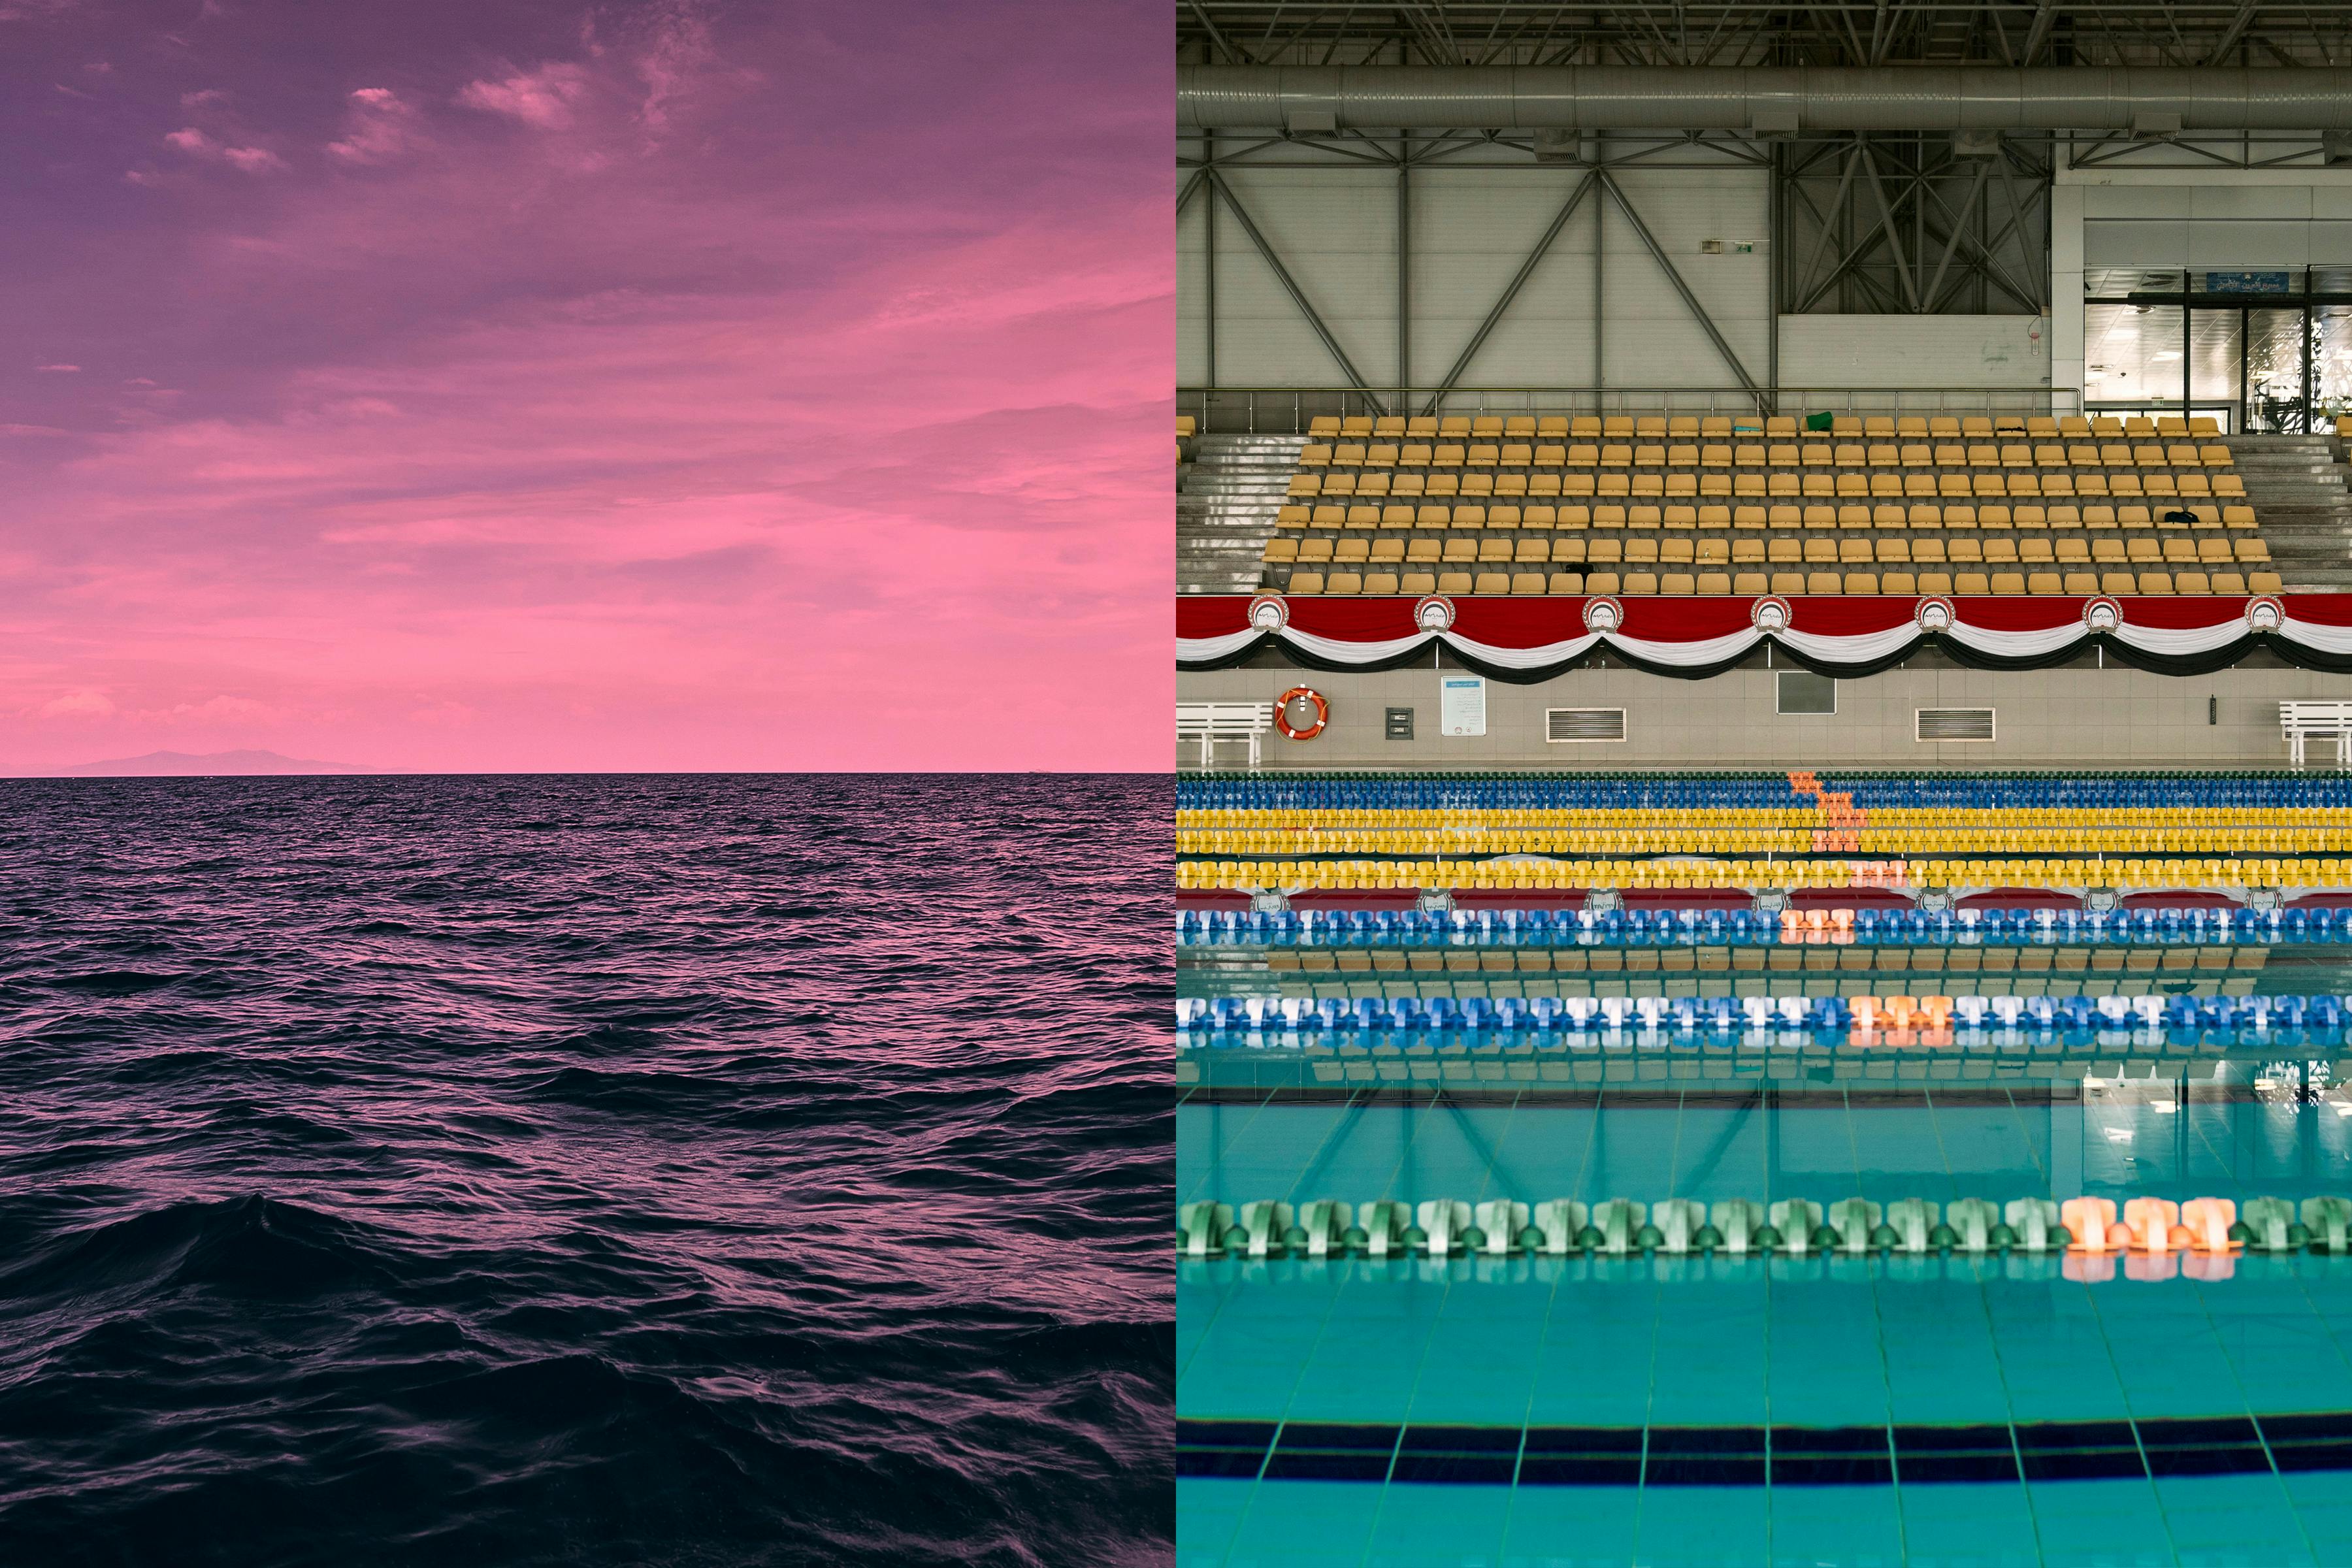 A diptych of the ocean and a pool.